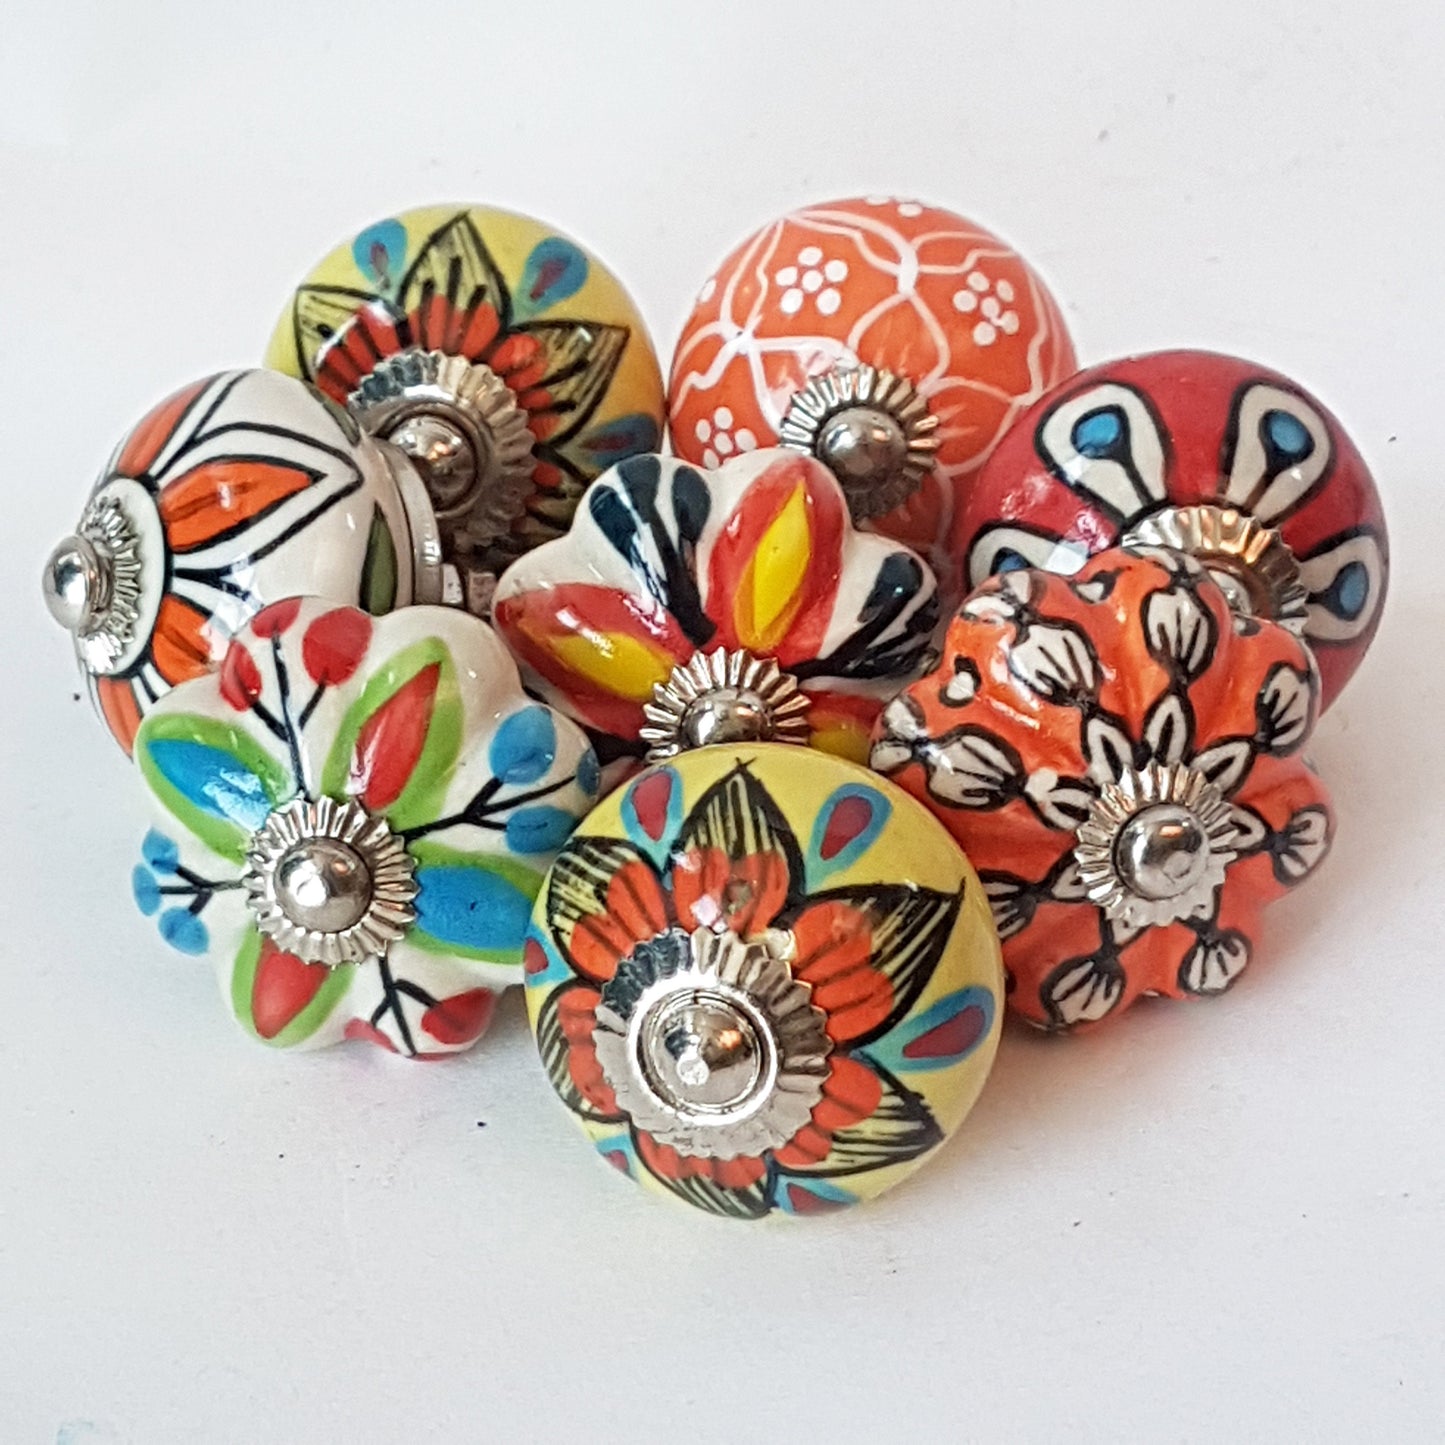 Tropicale collection of 8 designer hand painted knob pulls for cabinets and cupboards, dresser drawers.  Exclusive vibrant floral designs. - Vintage India Ca